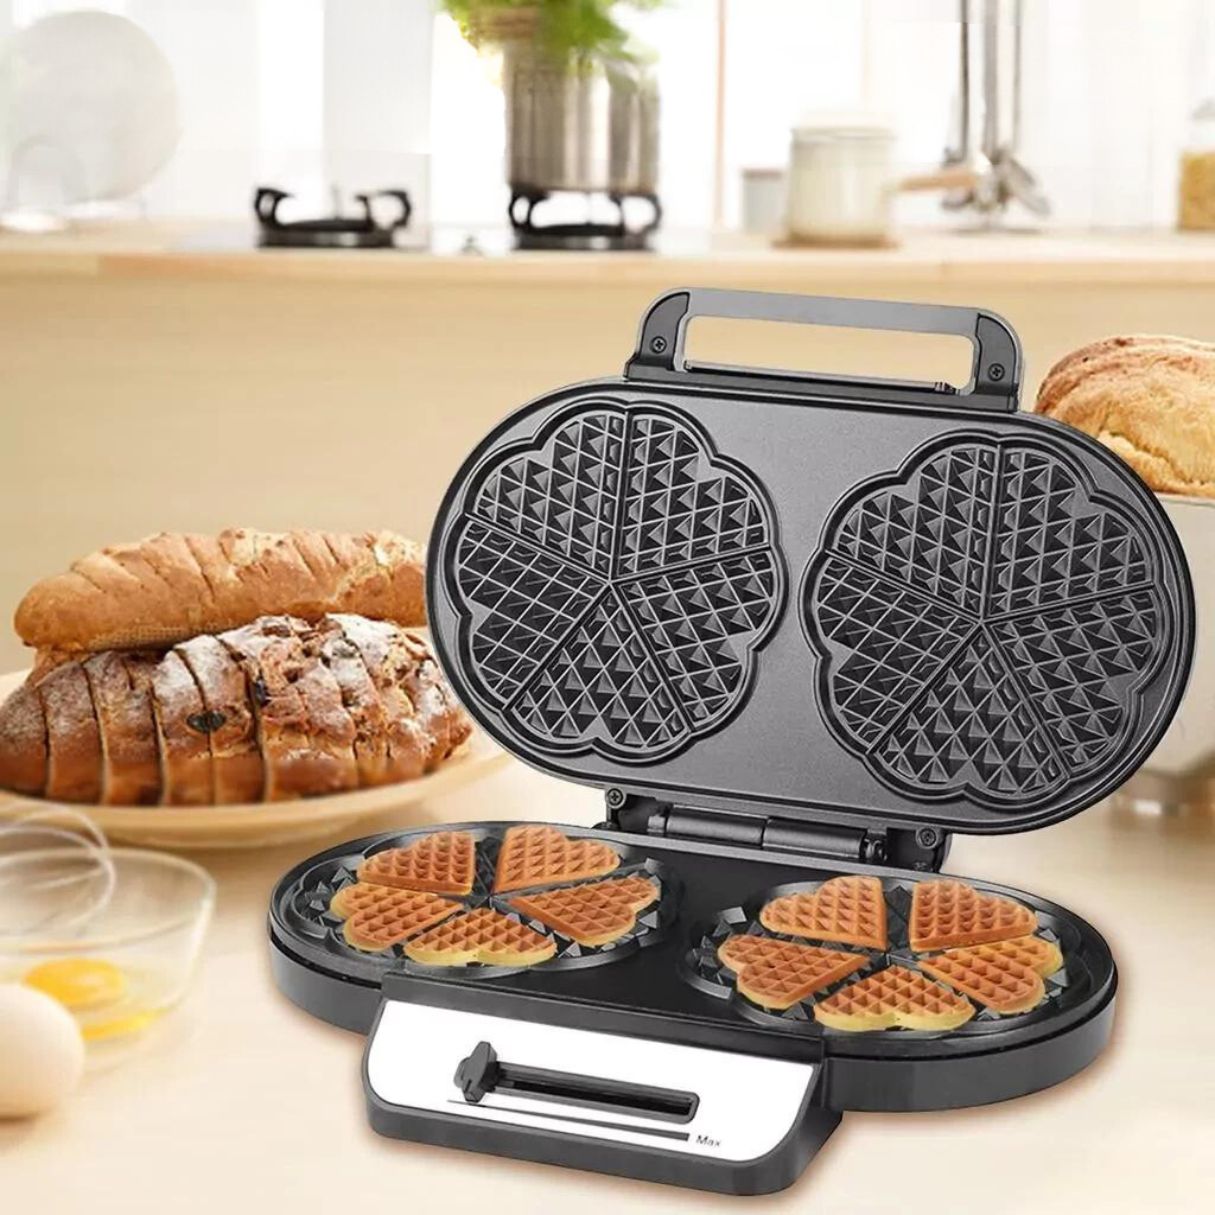 Waffle Iron Maker Machine 1400W + Hash Browns, or Any Breakfast